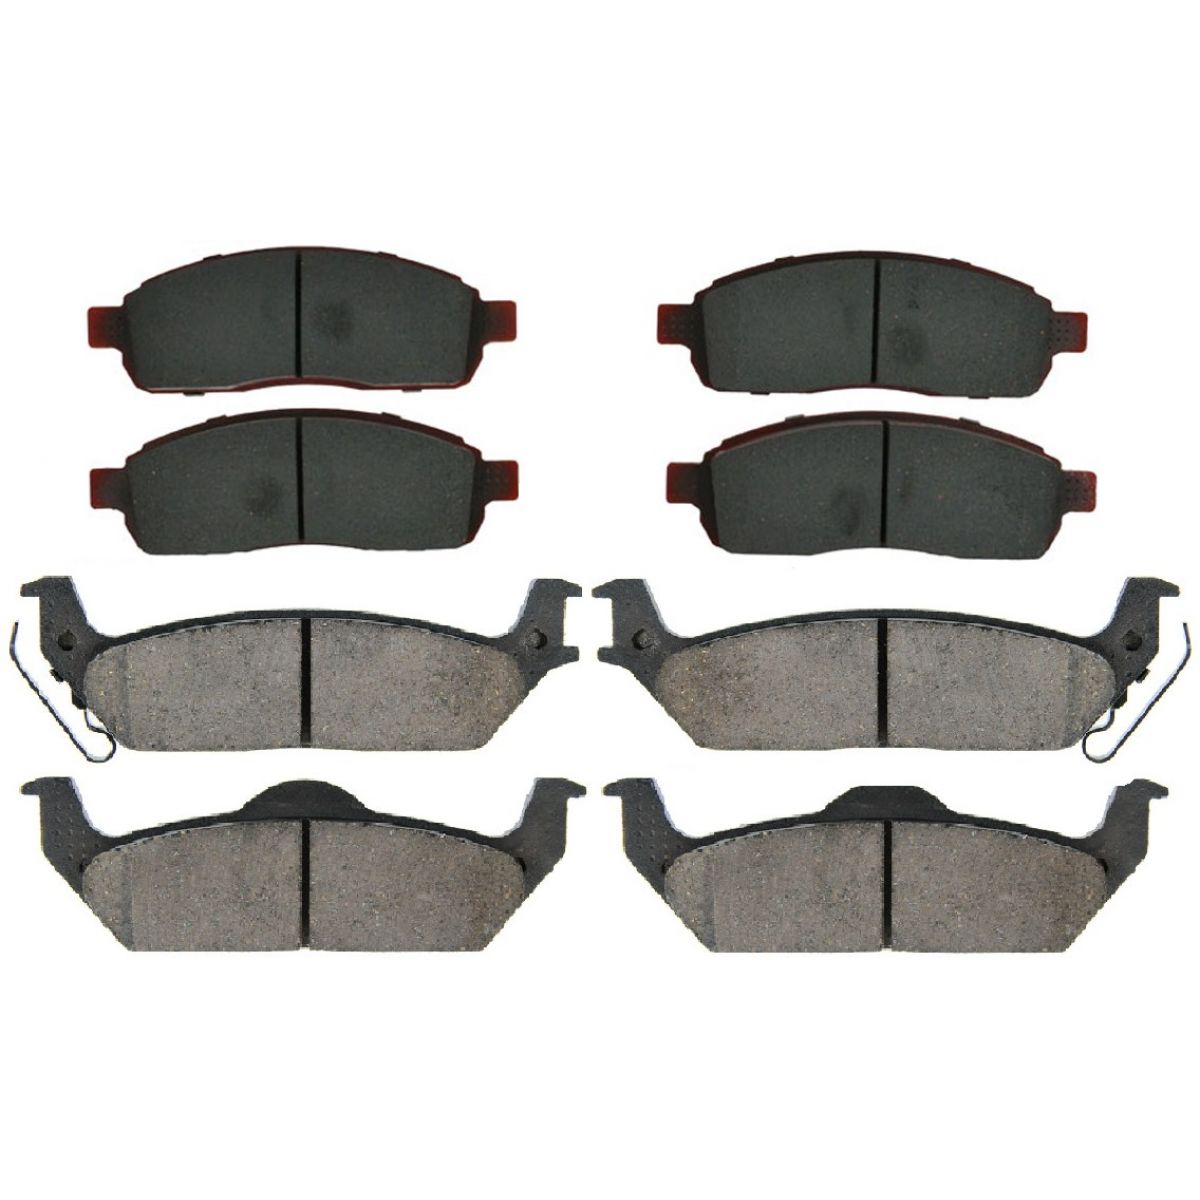 Brake pads ford f150 cost #9